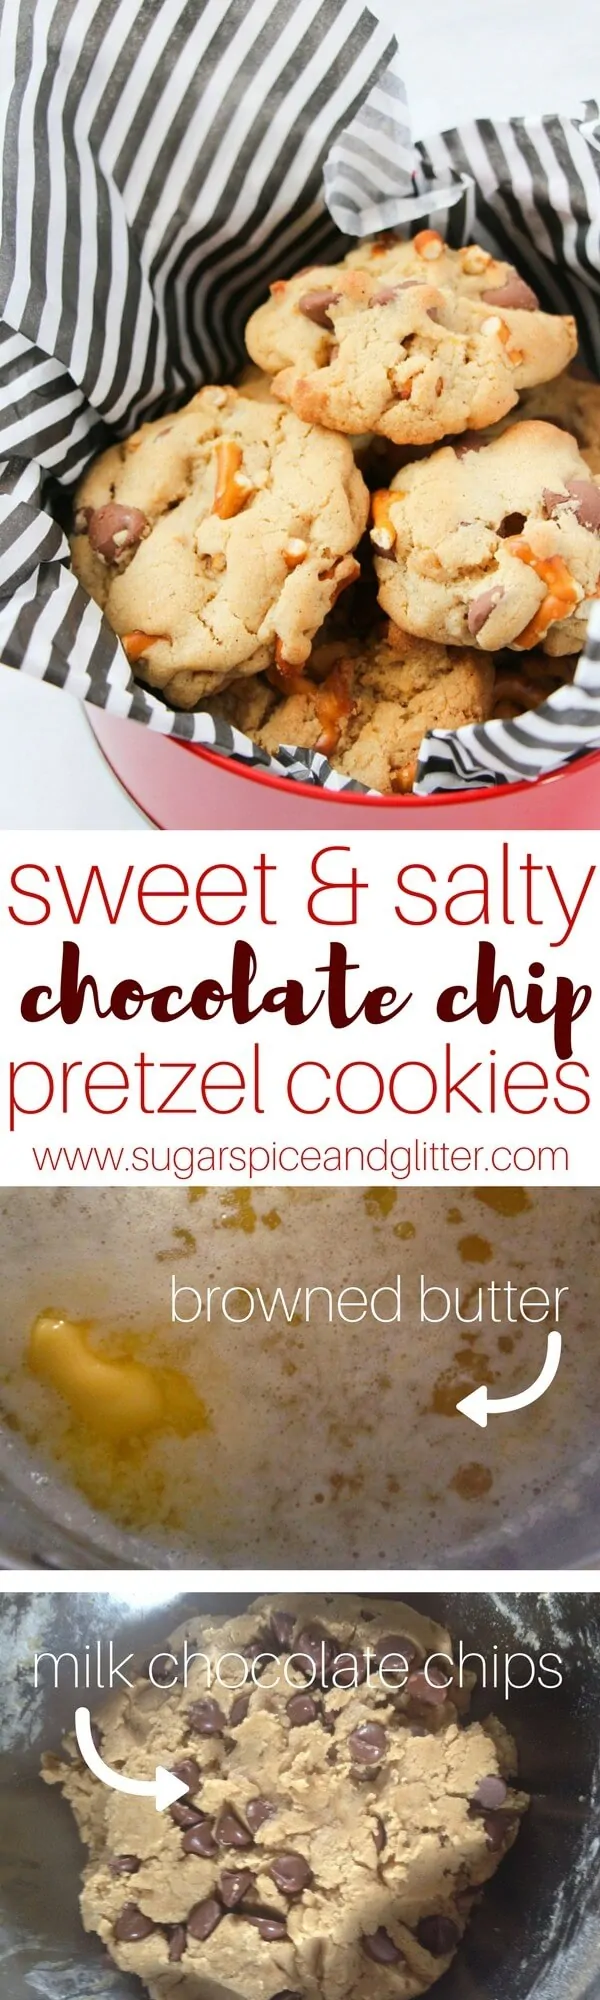 Salty-Sweet Pretzel Chocolate Chip Cookies are the perfect salty and sweet dessert - and perfect for gift giving!